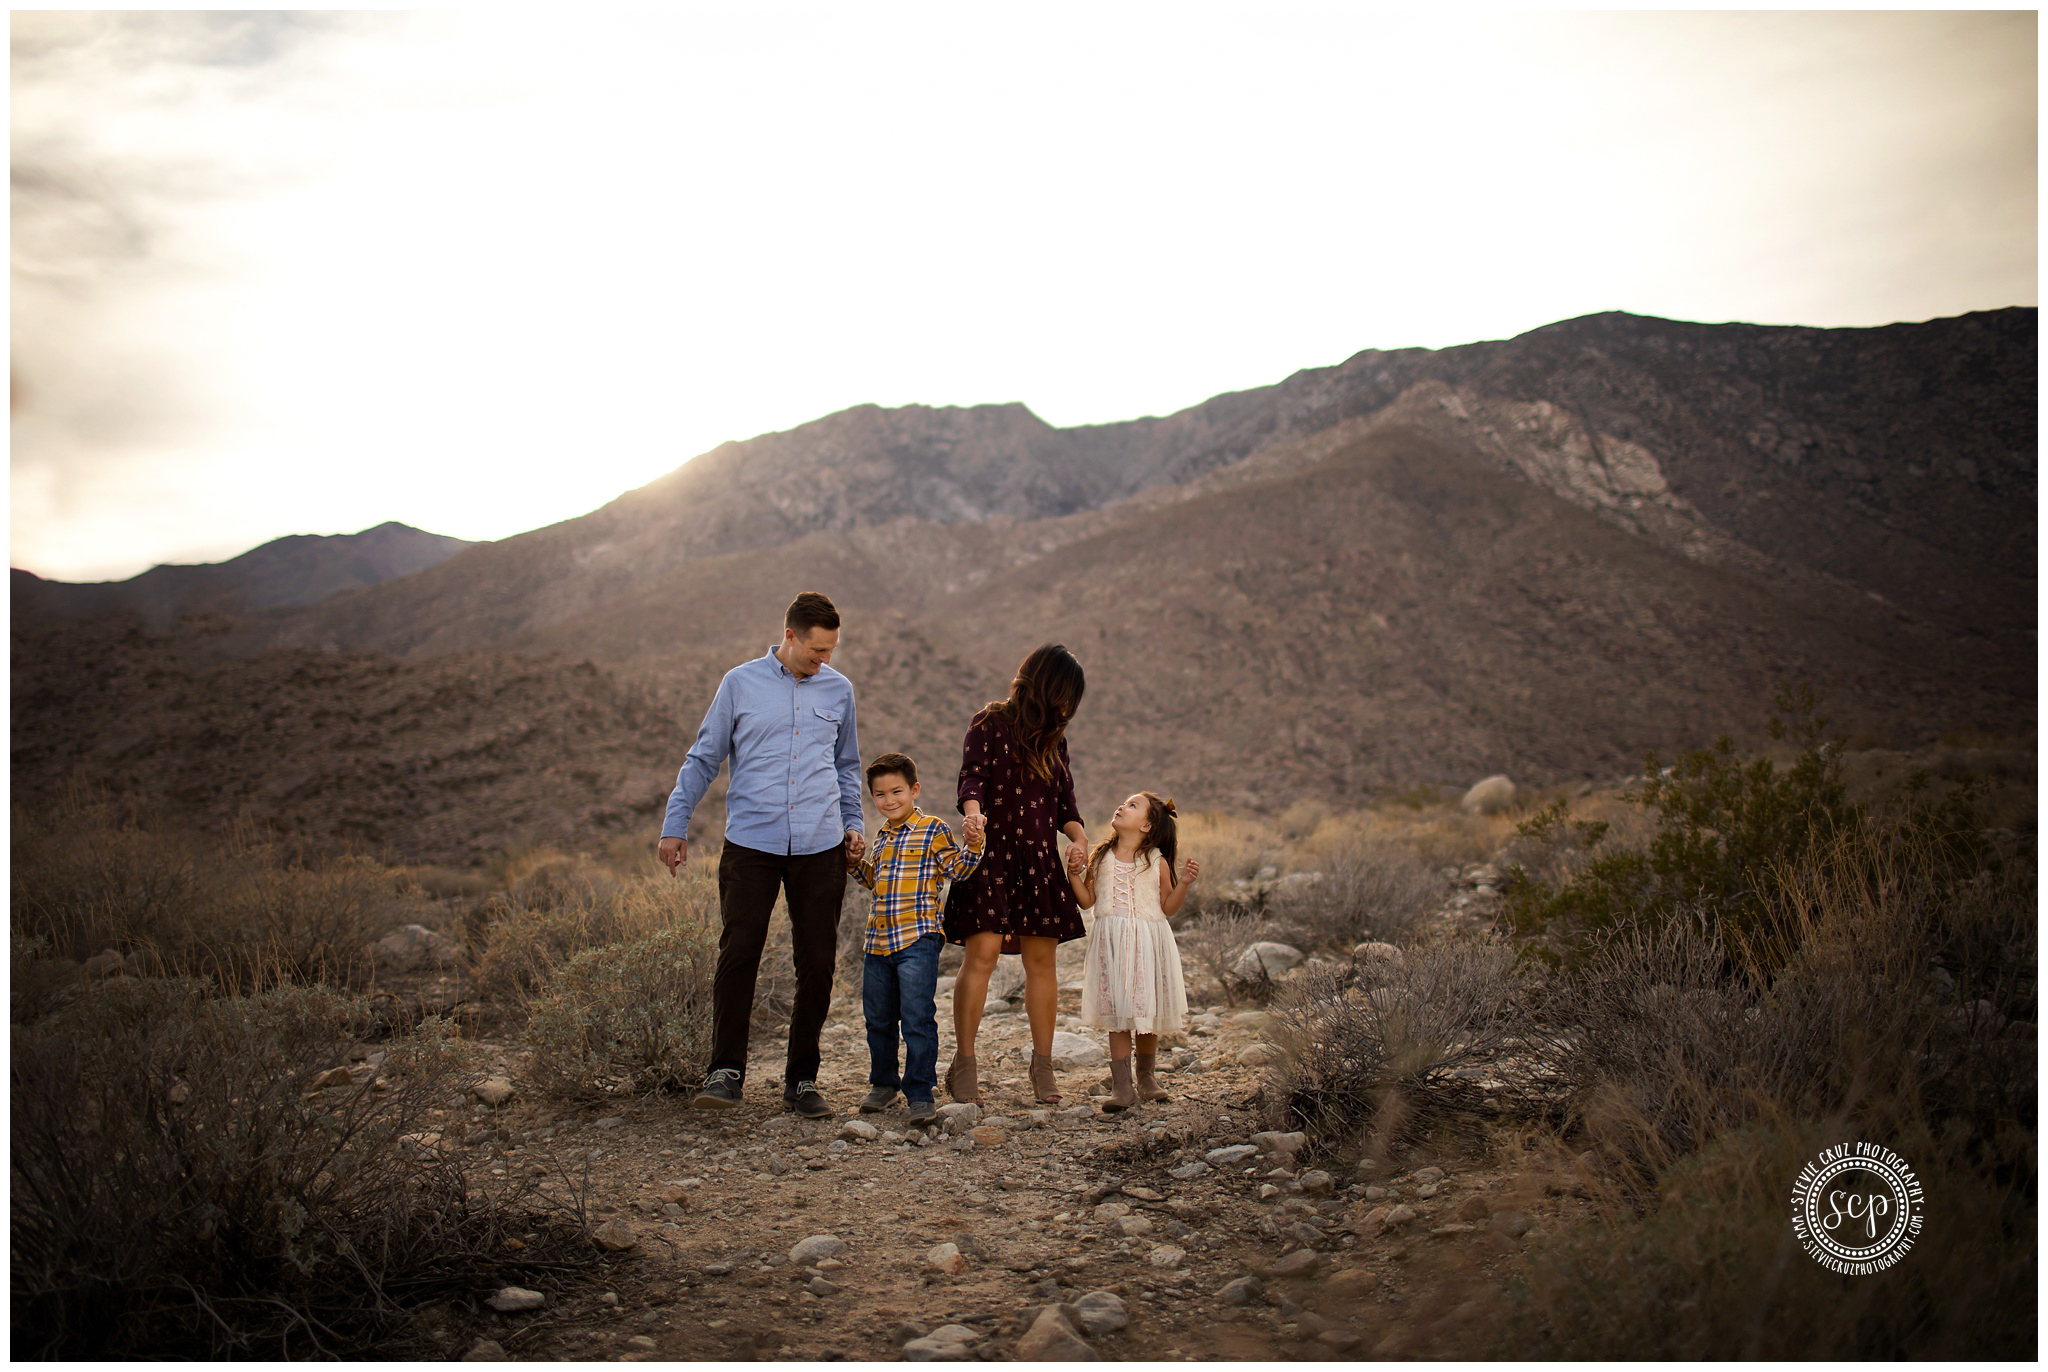 Palm Desert family pictures for the holidays.